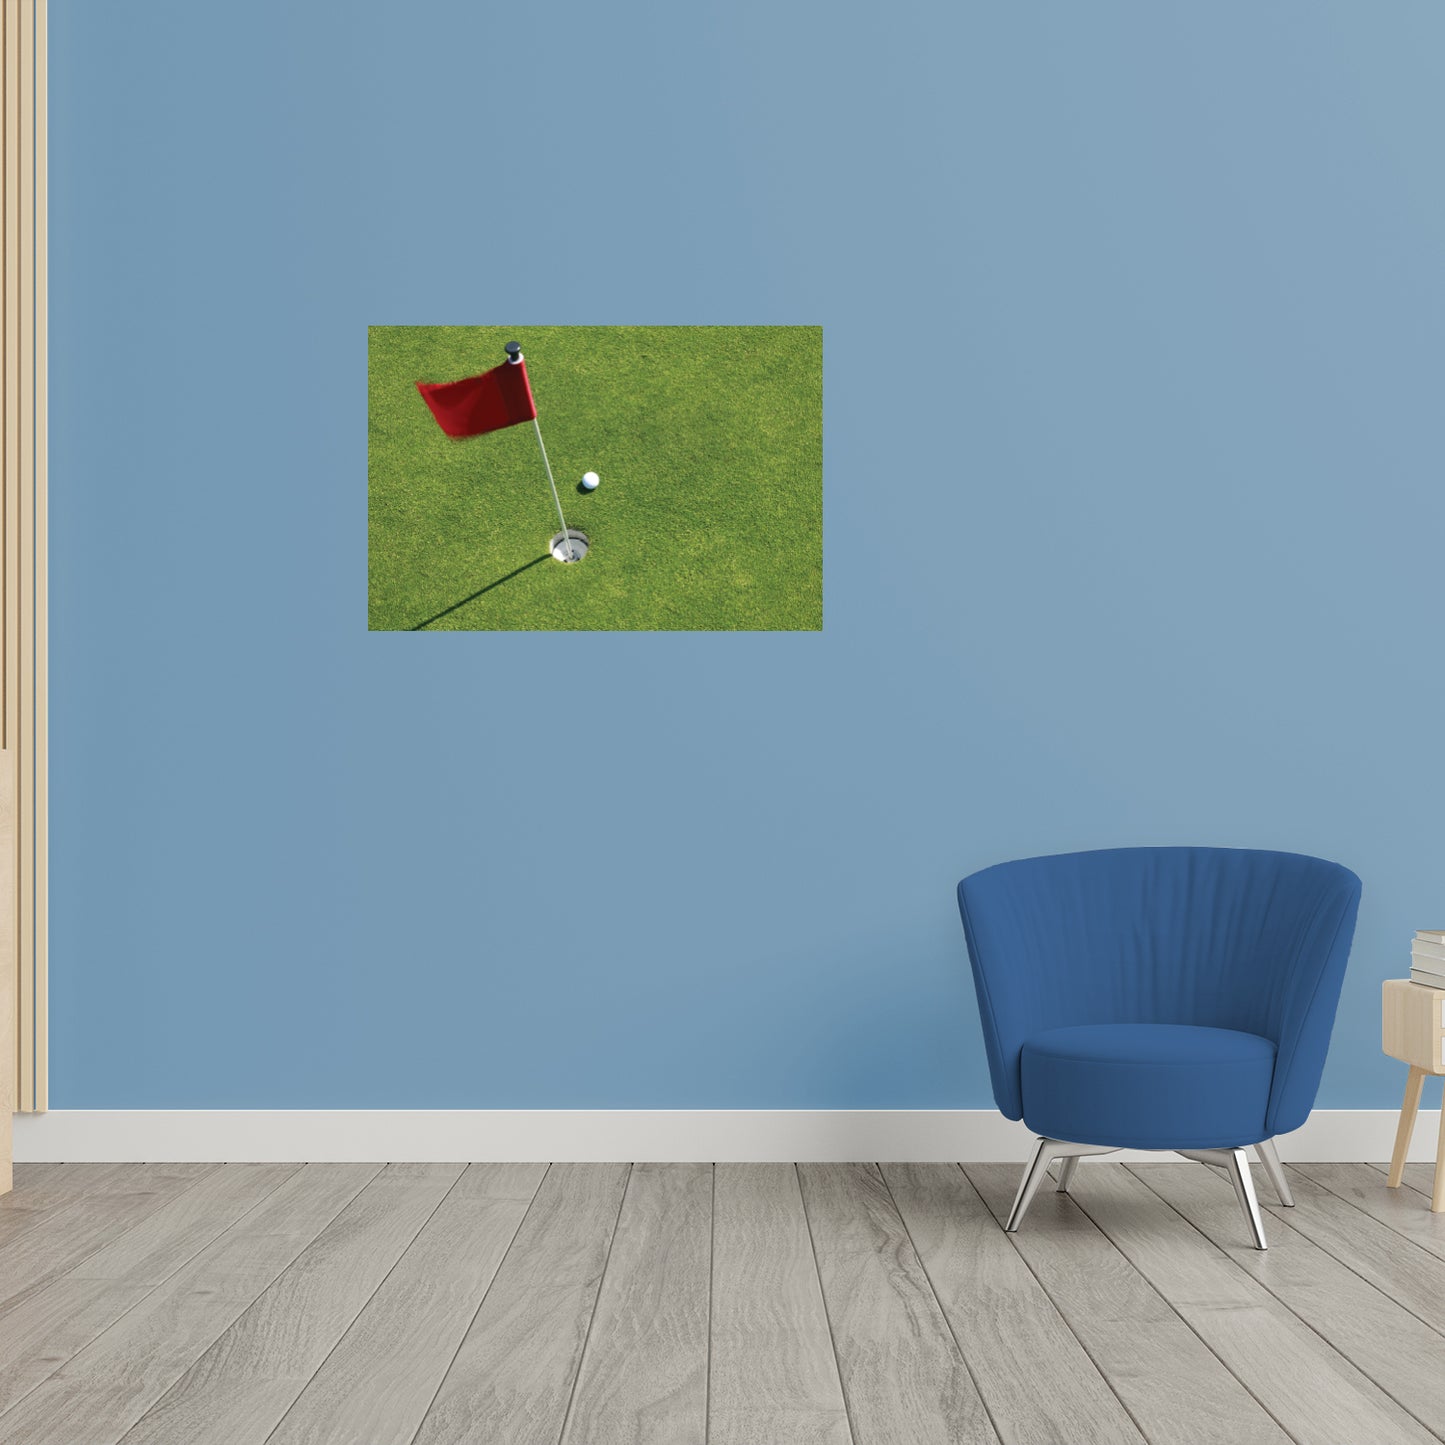 Golf: Ball Poster        -   Removable     Adhesive Decal